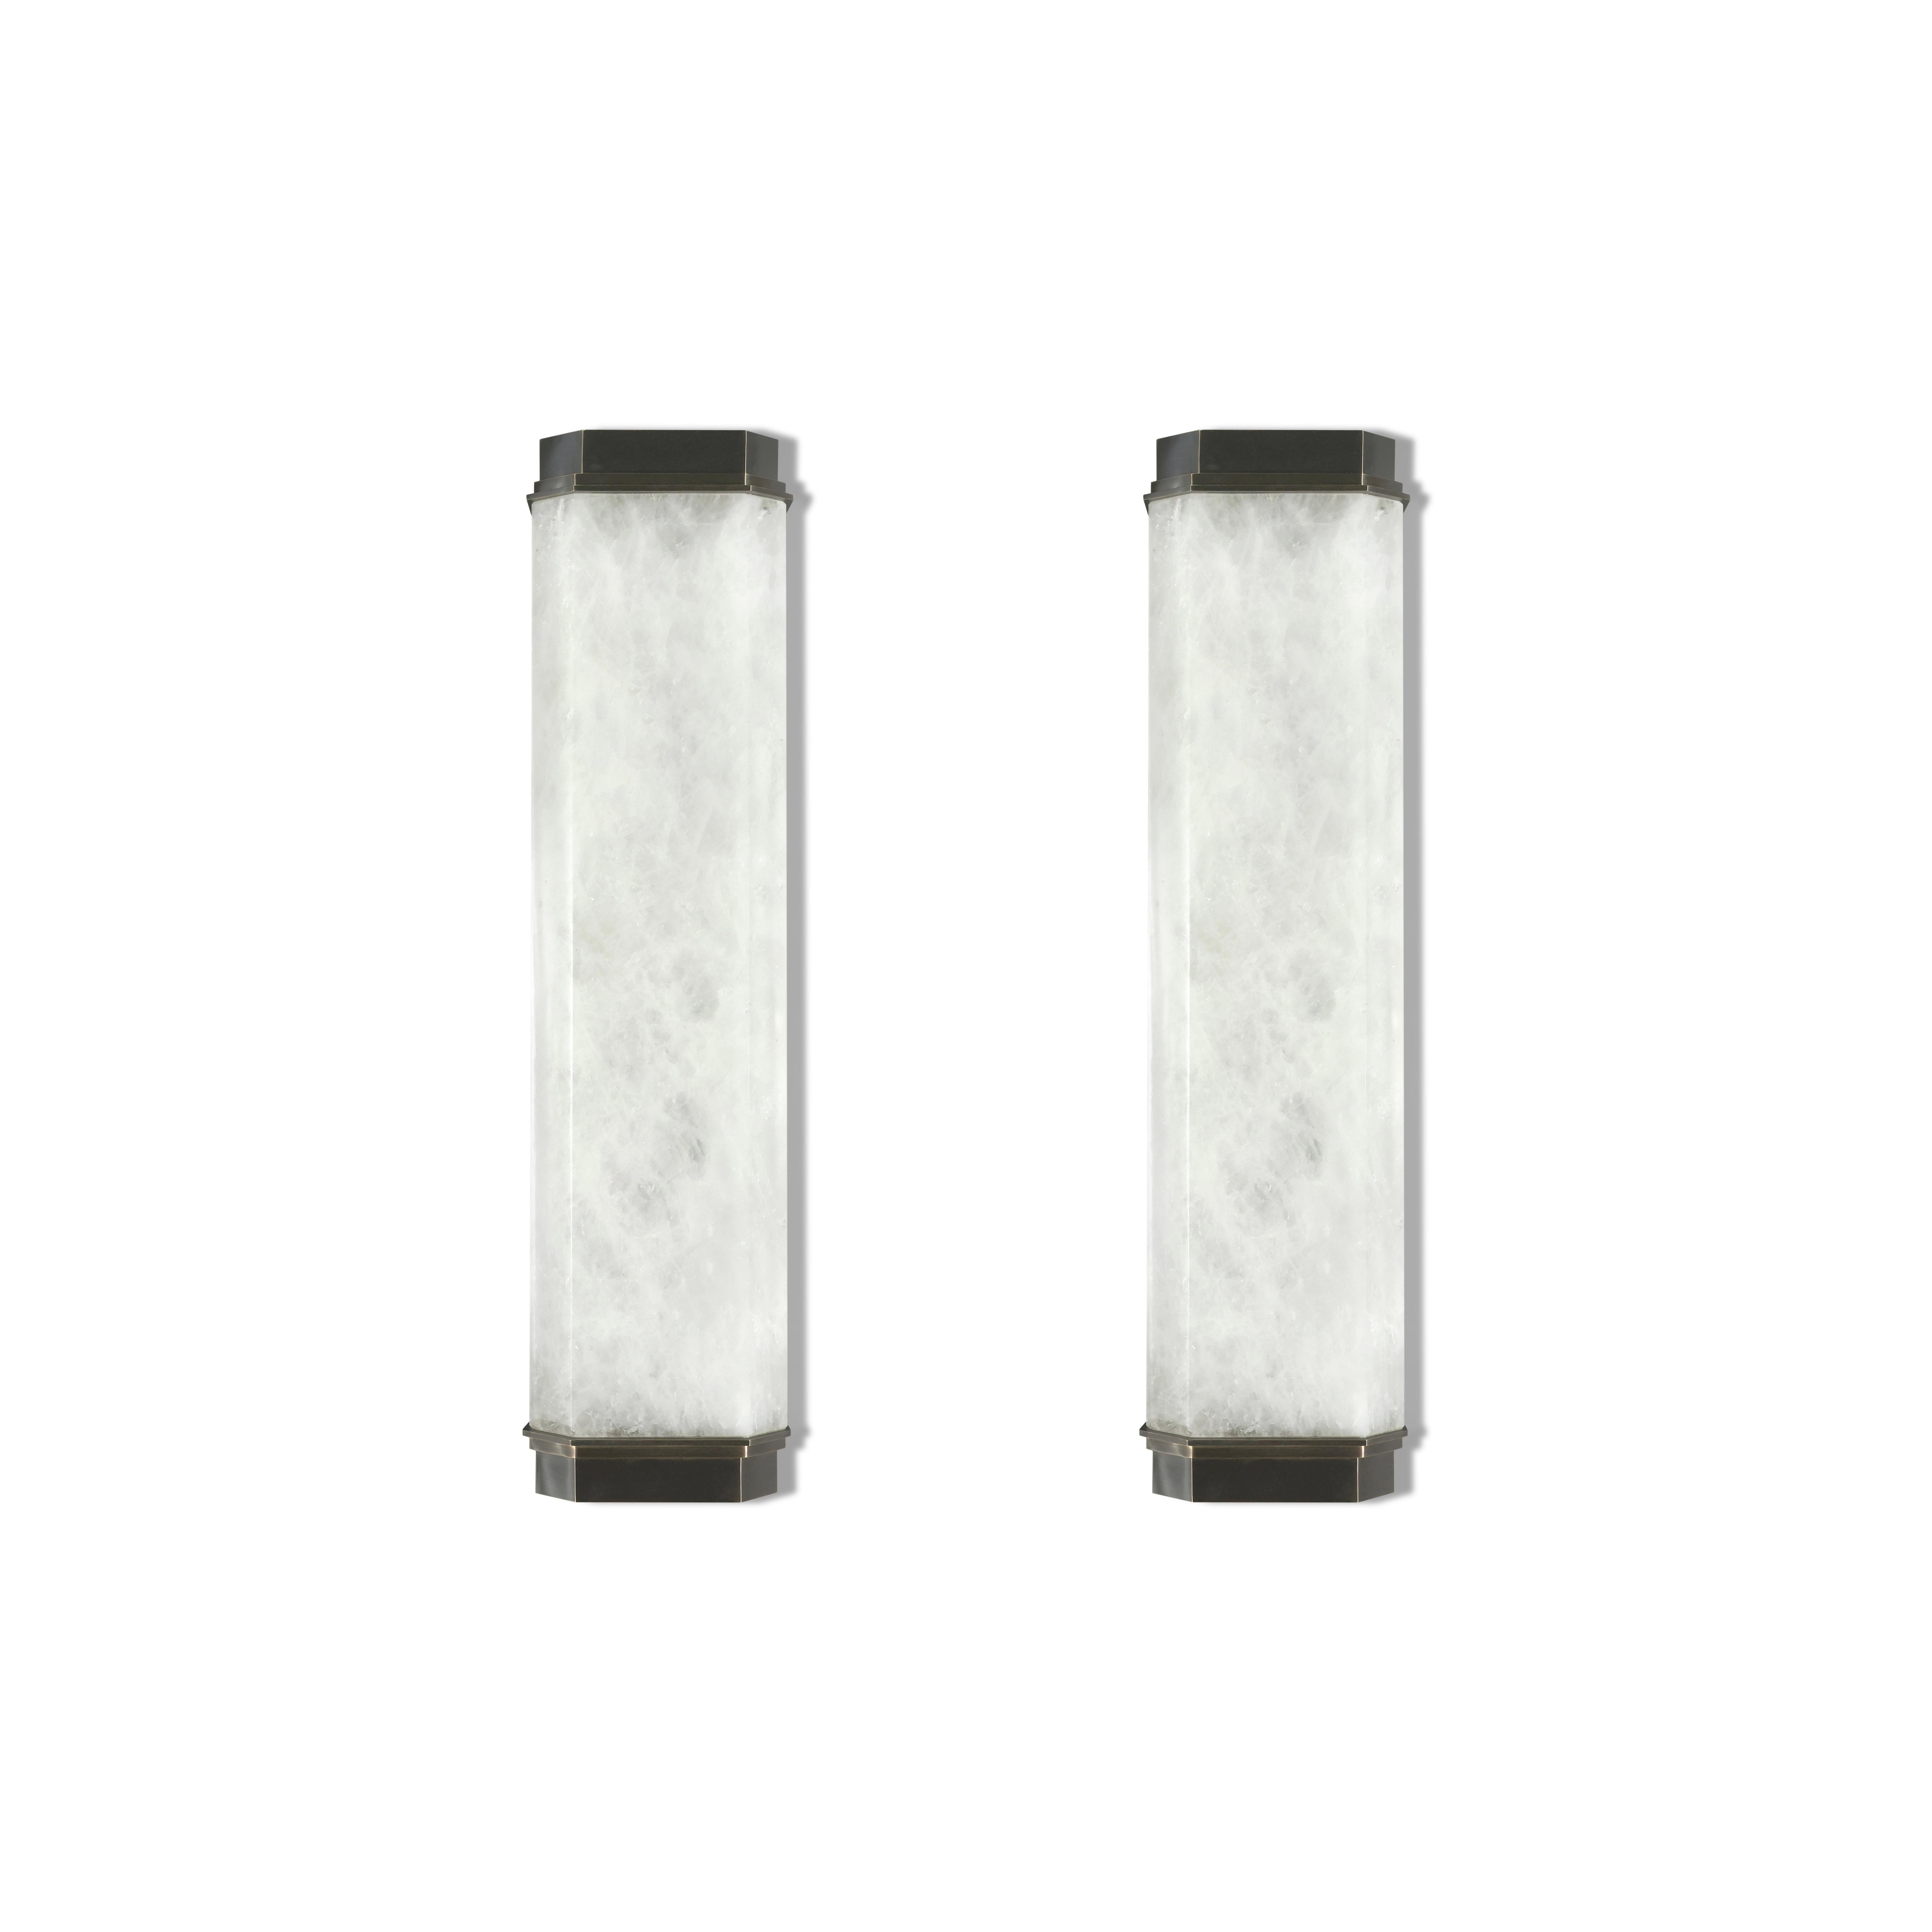 pair of rock crystal sconces with polish nickel decoration. Created by Phoenix Gallery. Each sconce installed with two E26 sockets. Use two 80 watts long tube LED warm light lightbulbs. 160w total.
Work with 2”x4” jbox 